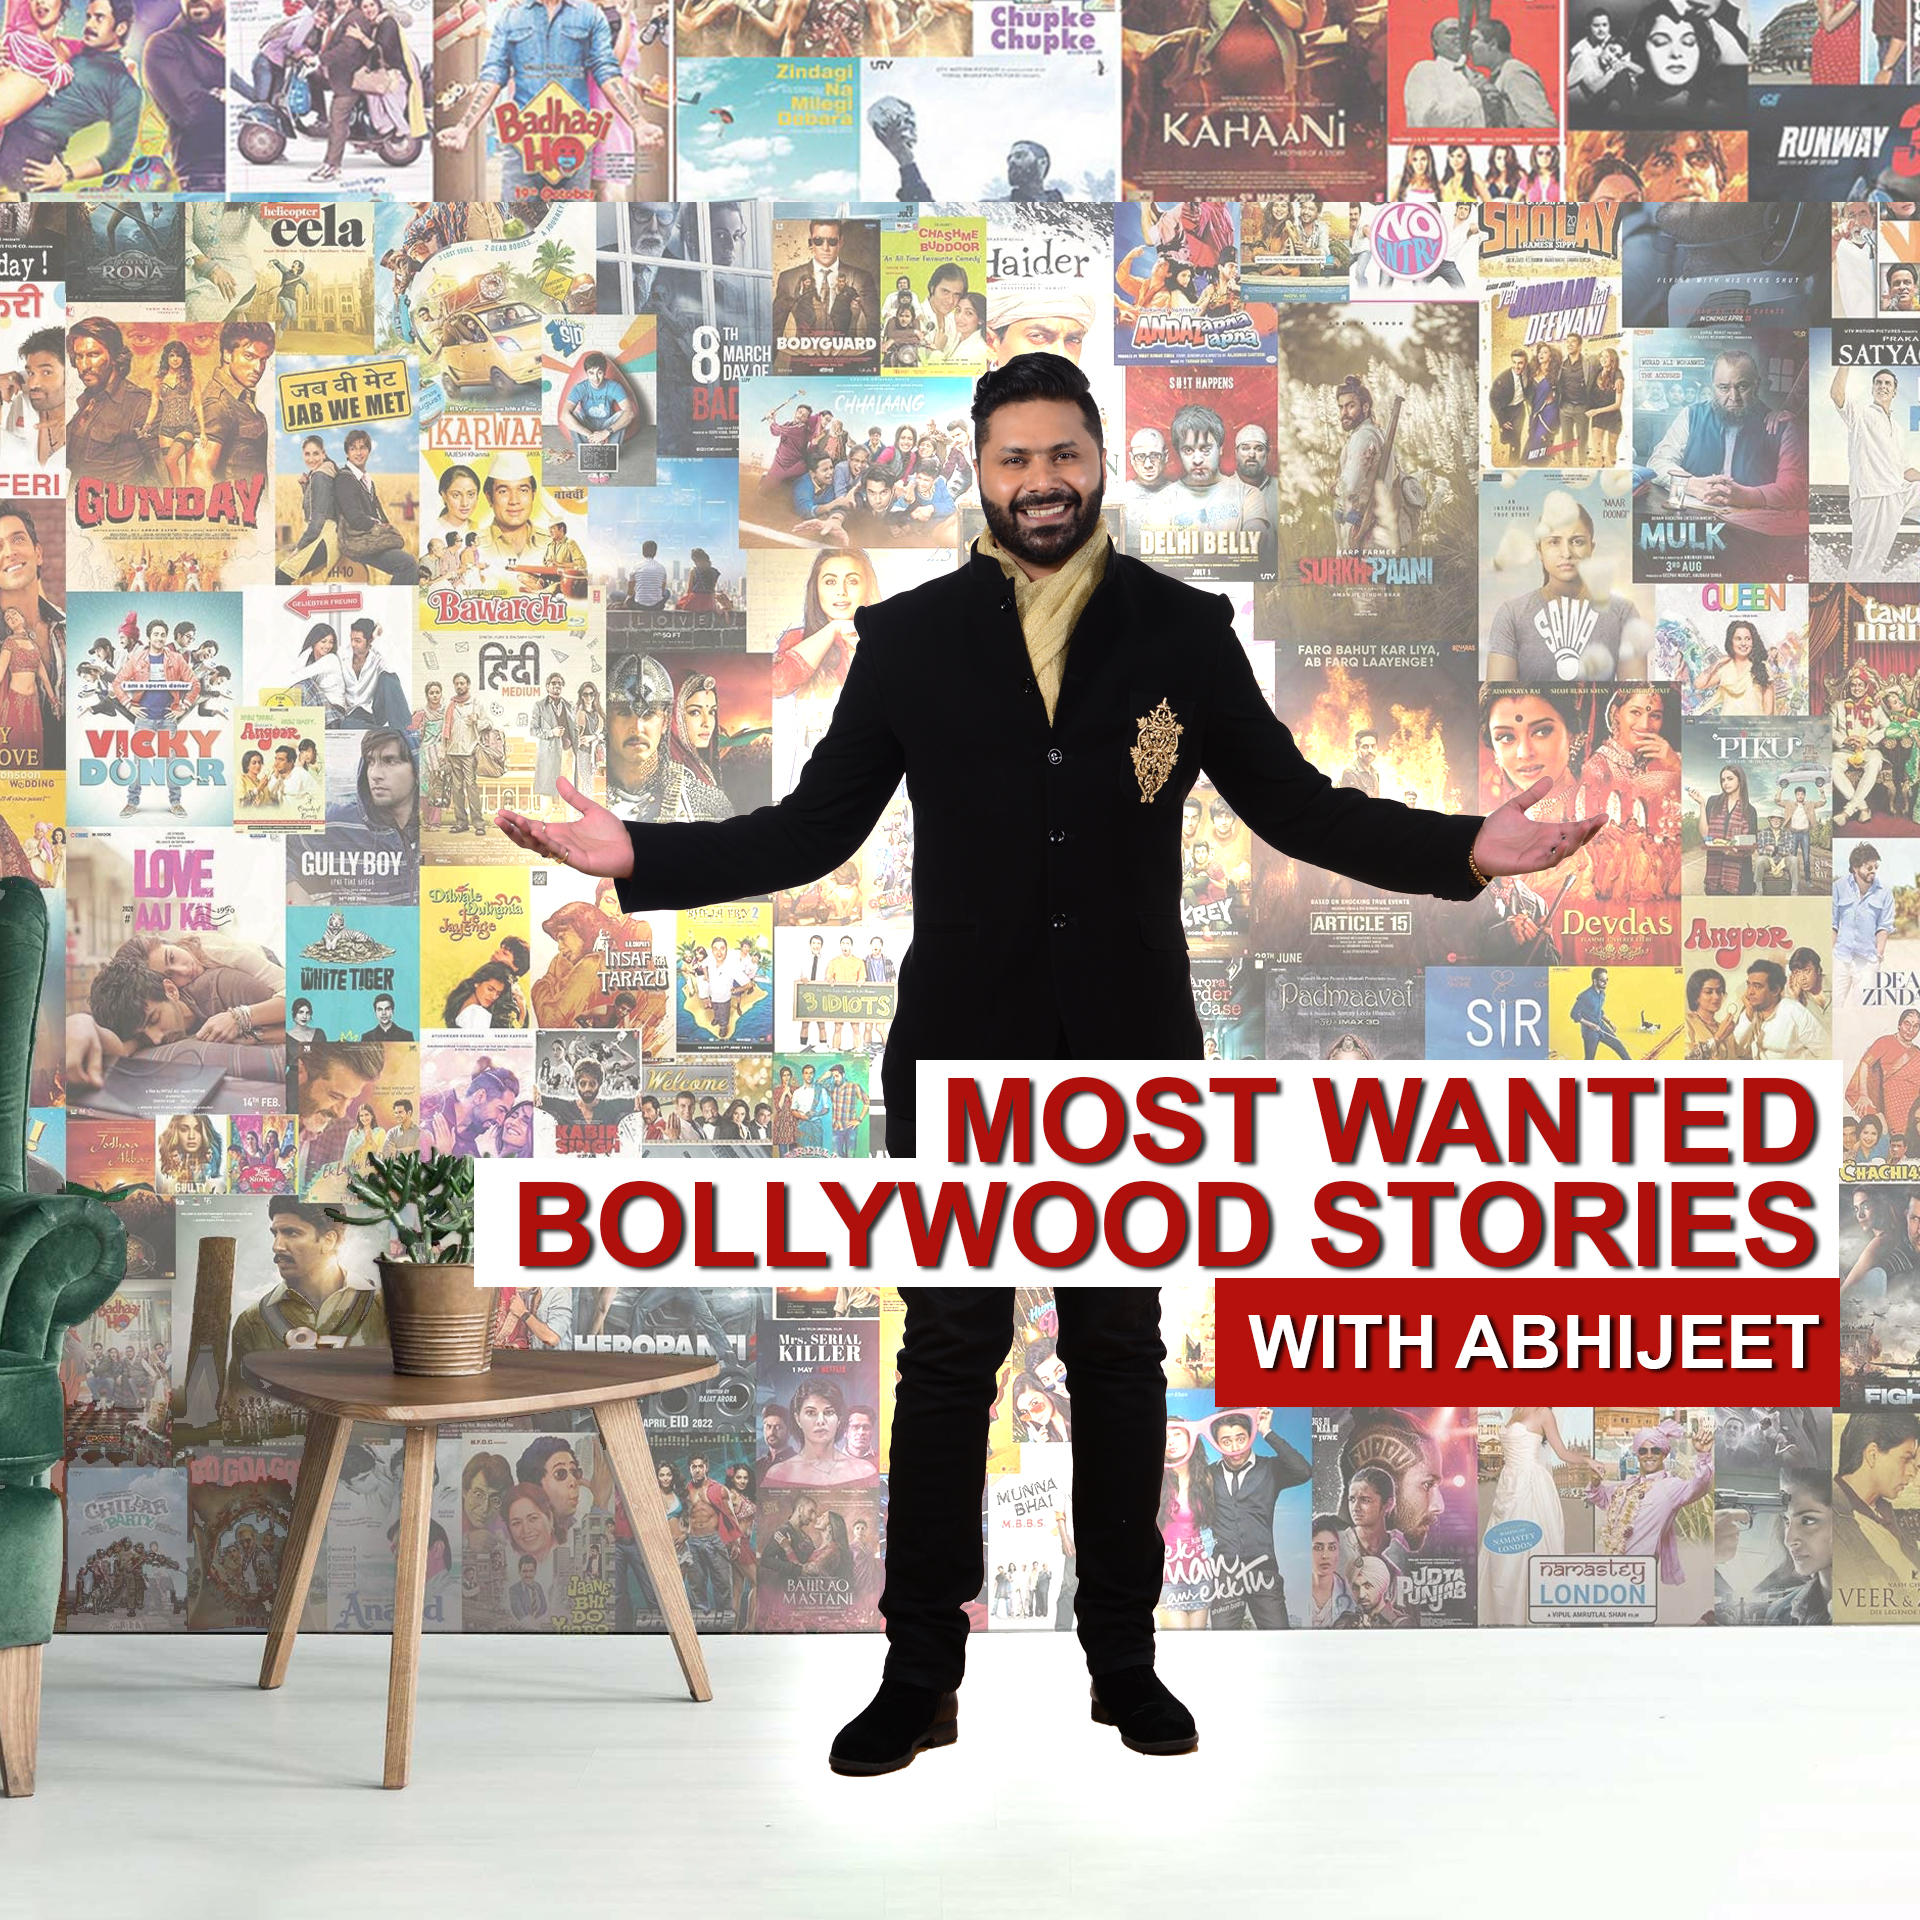 MOST WANTED BOLLYWOOD STORIES WITH ABHIJEET